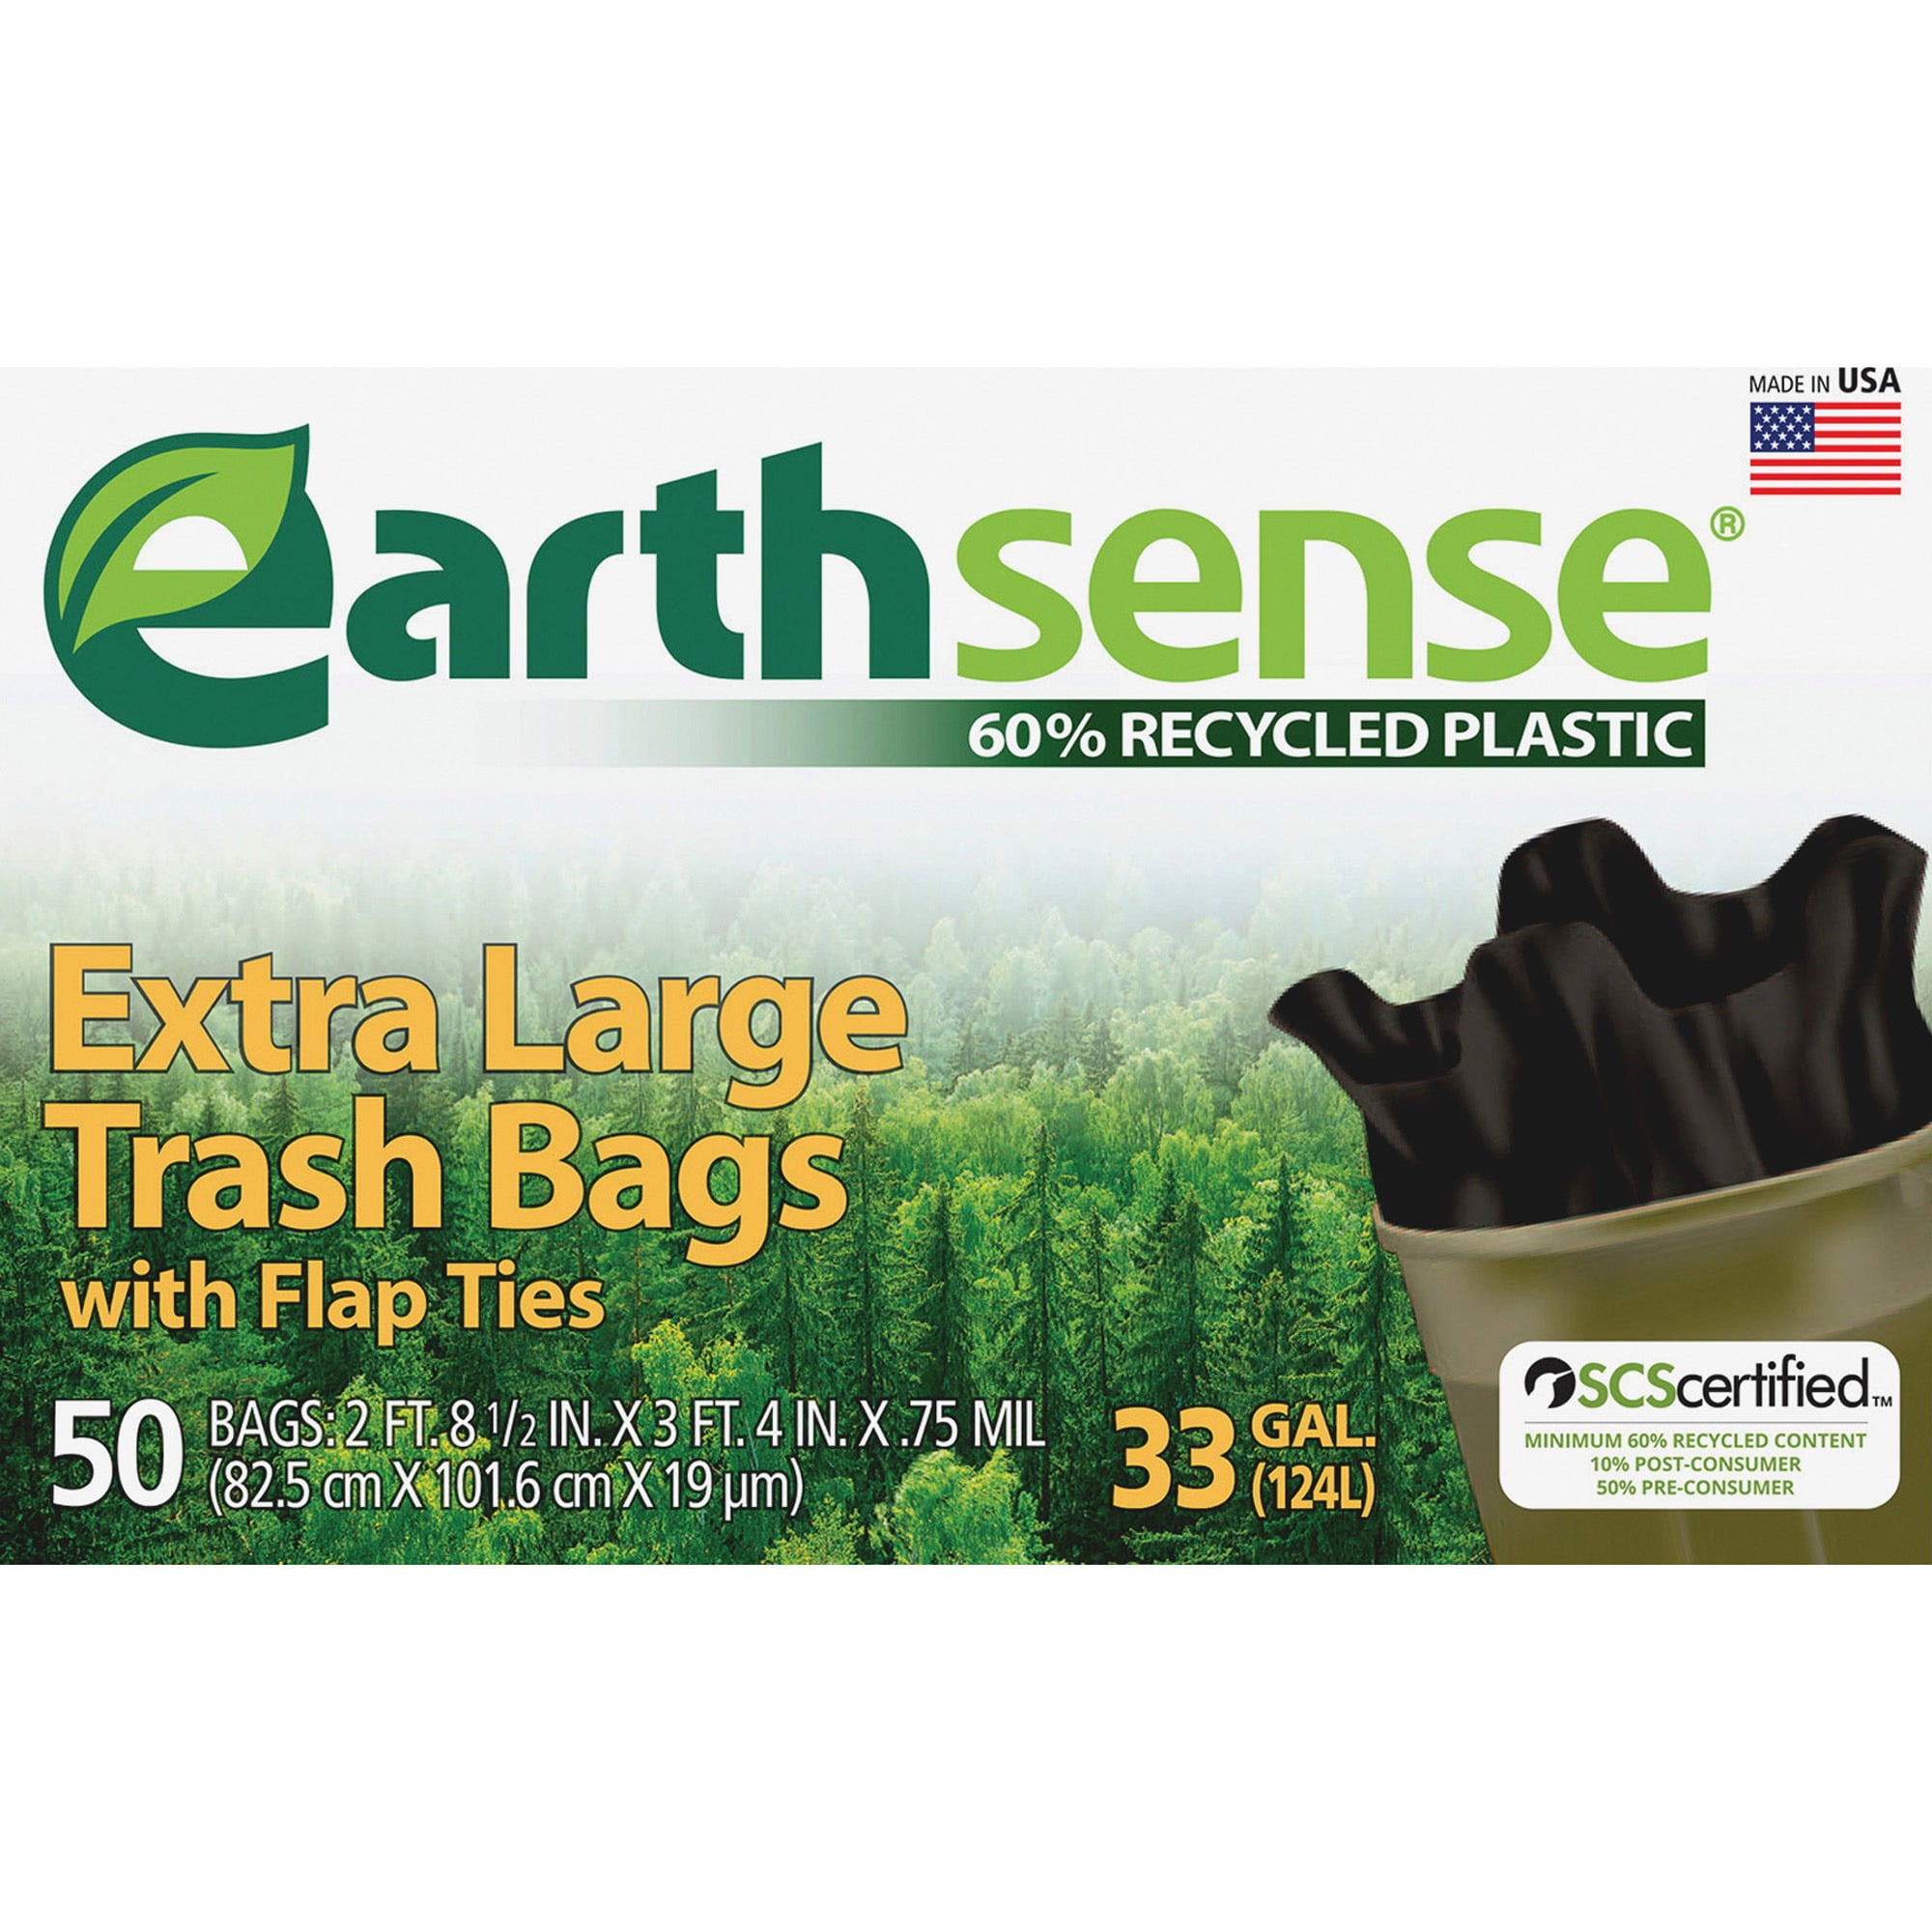 33 Gallon Trash Bags - Heavy Duty Black Garbage Bags, Upgraded Version  Large Trash Bag Can Liners 32x39Inch, 30 Gallon - 32 Gallon - 35 Gallon  Trash